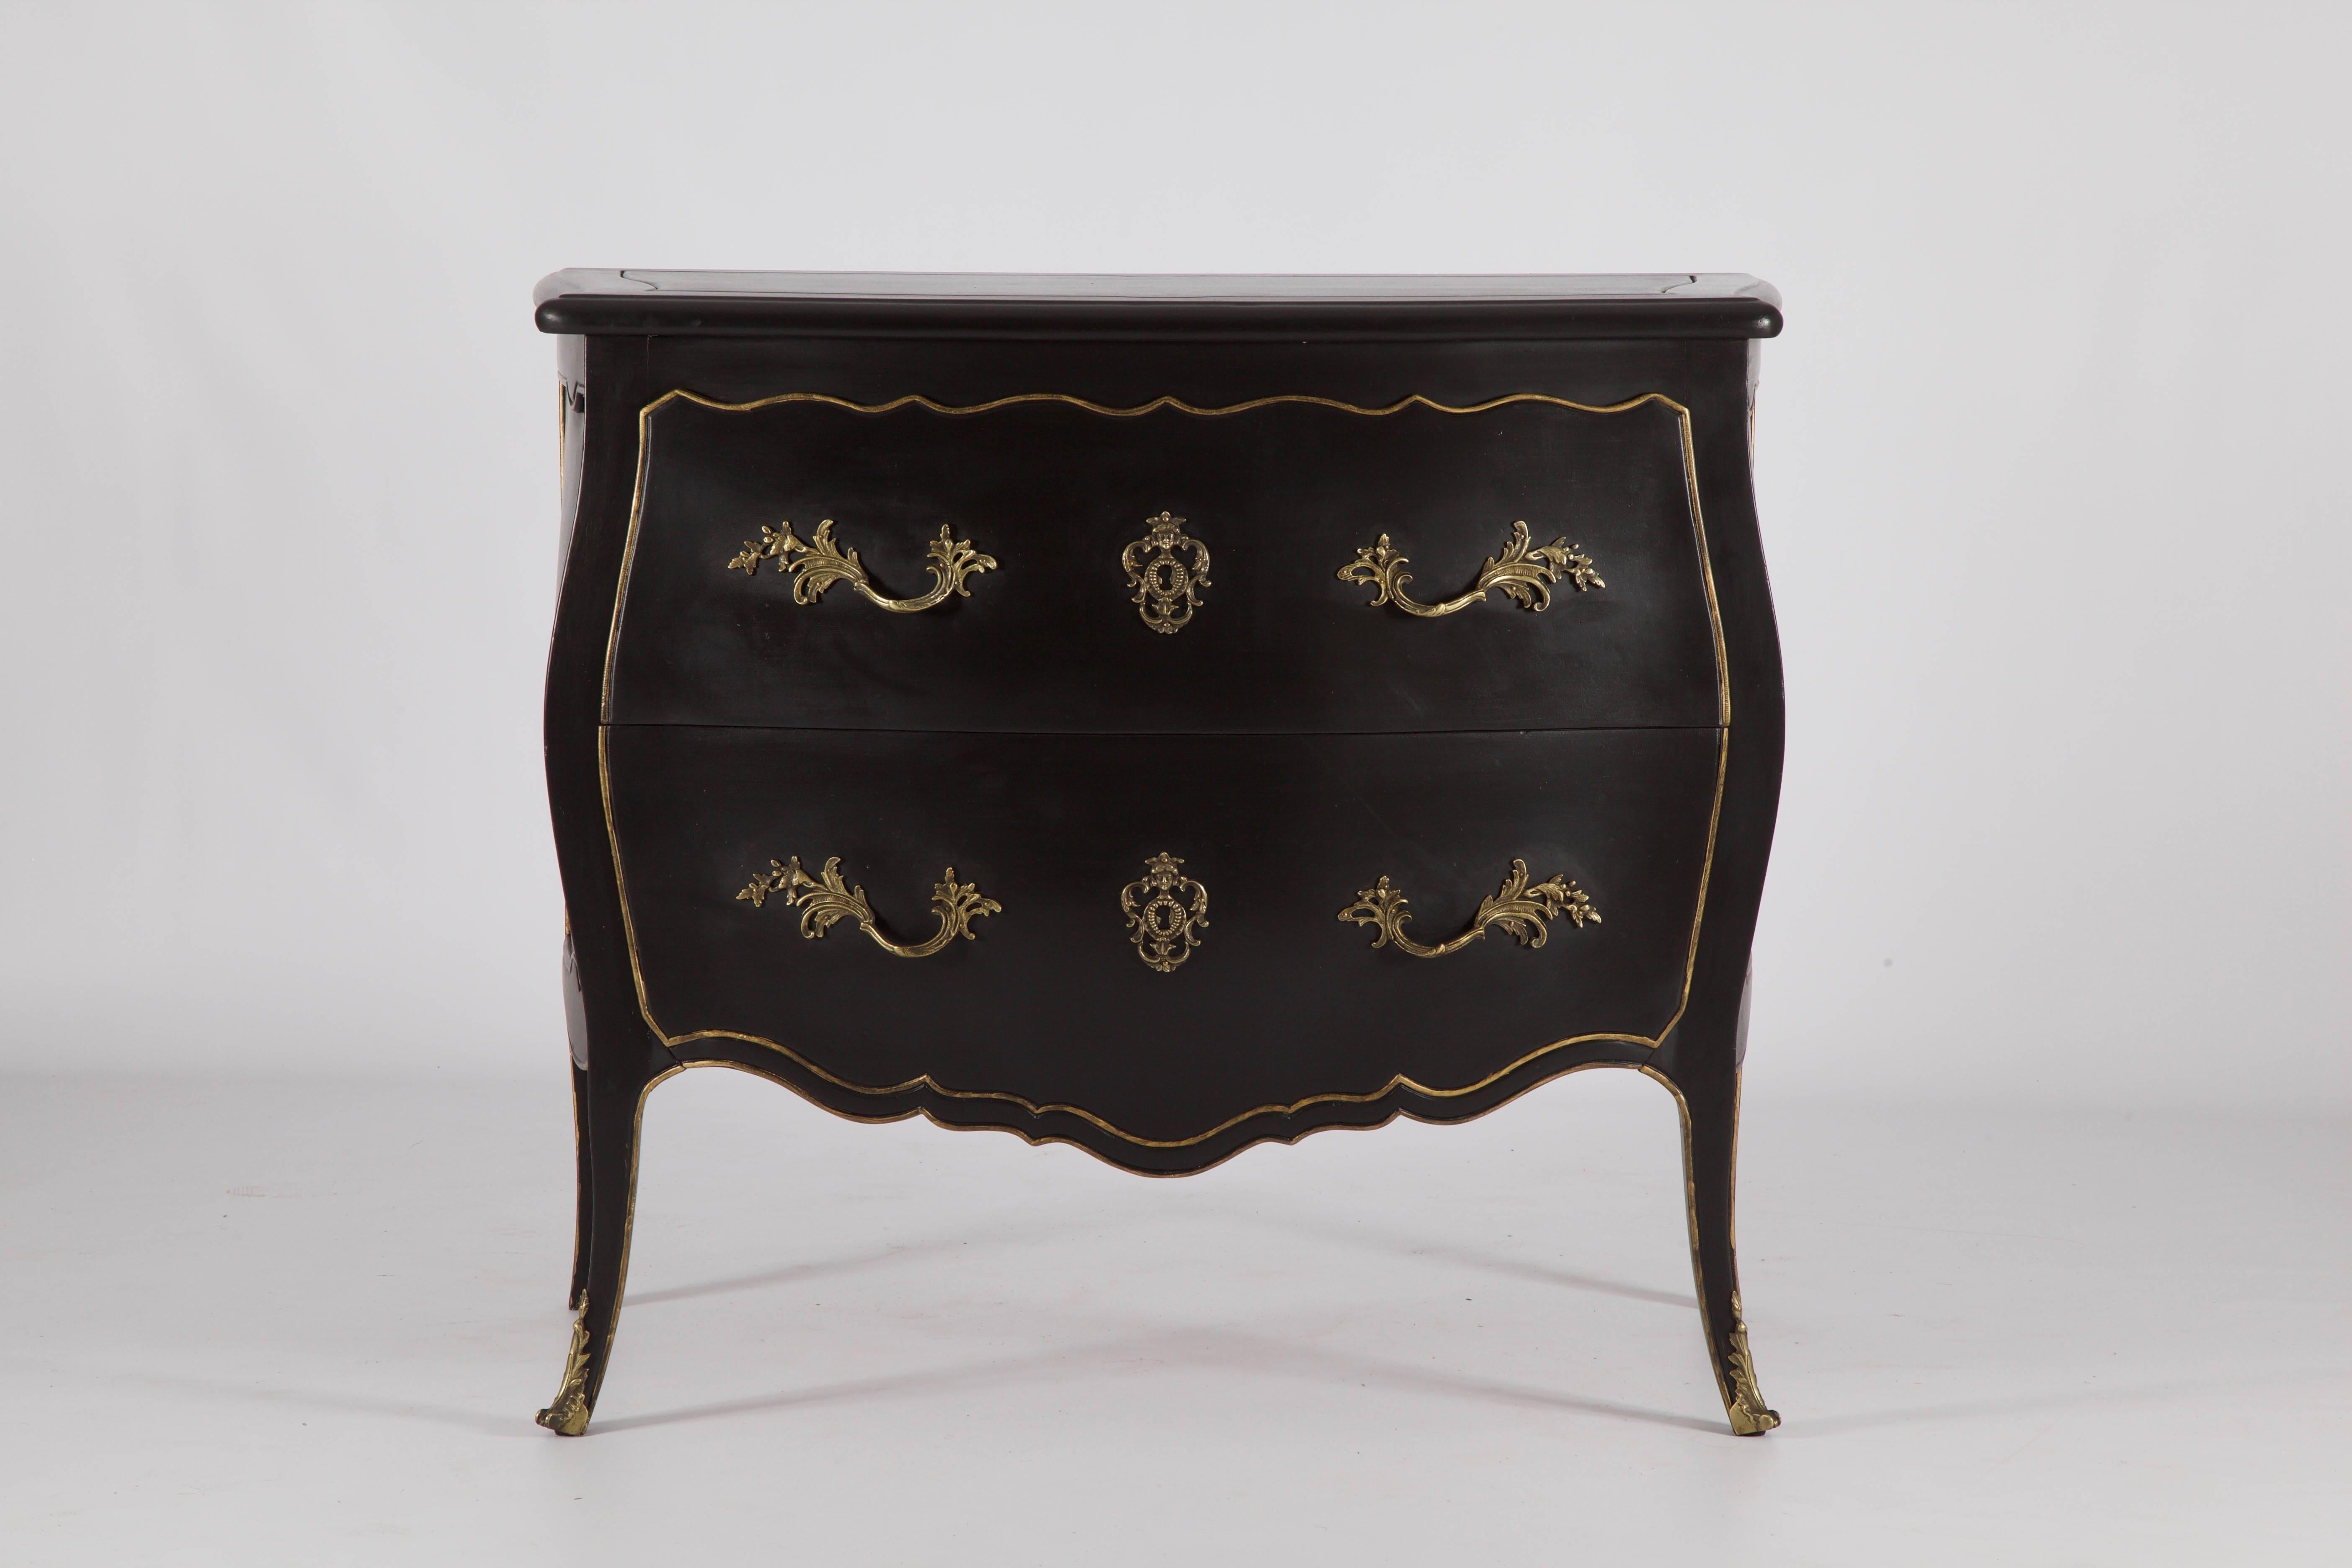 Louis XV style commode, hand-carved and hand finished in a black lacquer patina with gilded trim highlights. Completed with bronze ormolu drawer pulls and key holes in an aged patina.